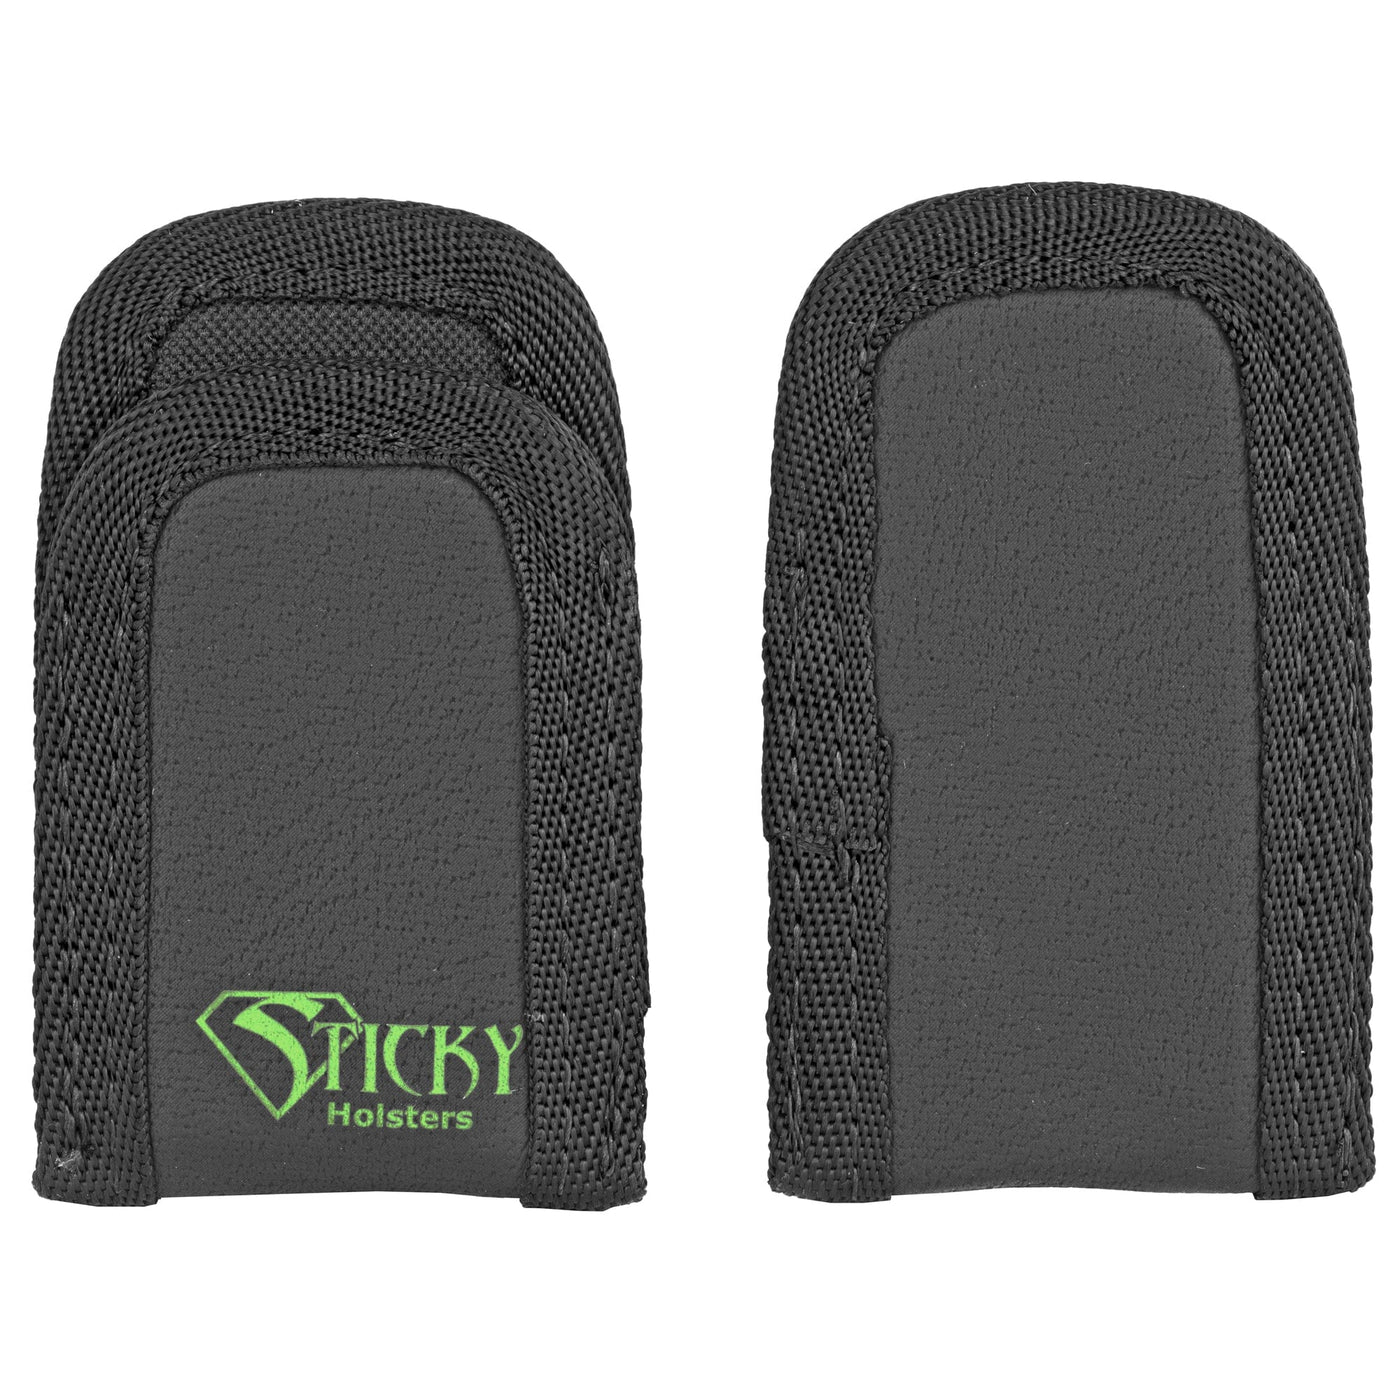 Sticky Holsters Sticky Mini Mag Sleeve 2 Pack Holsters